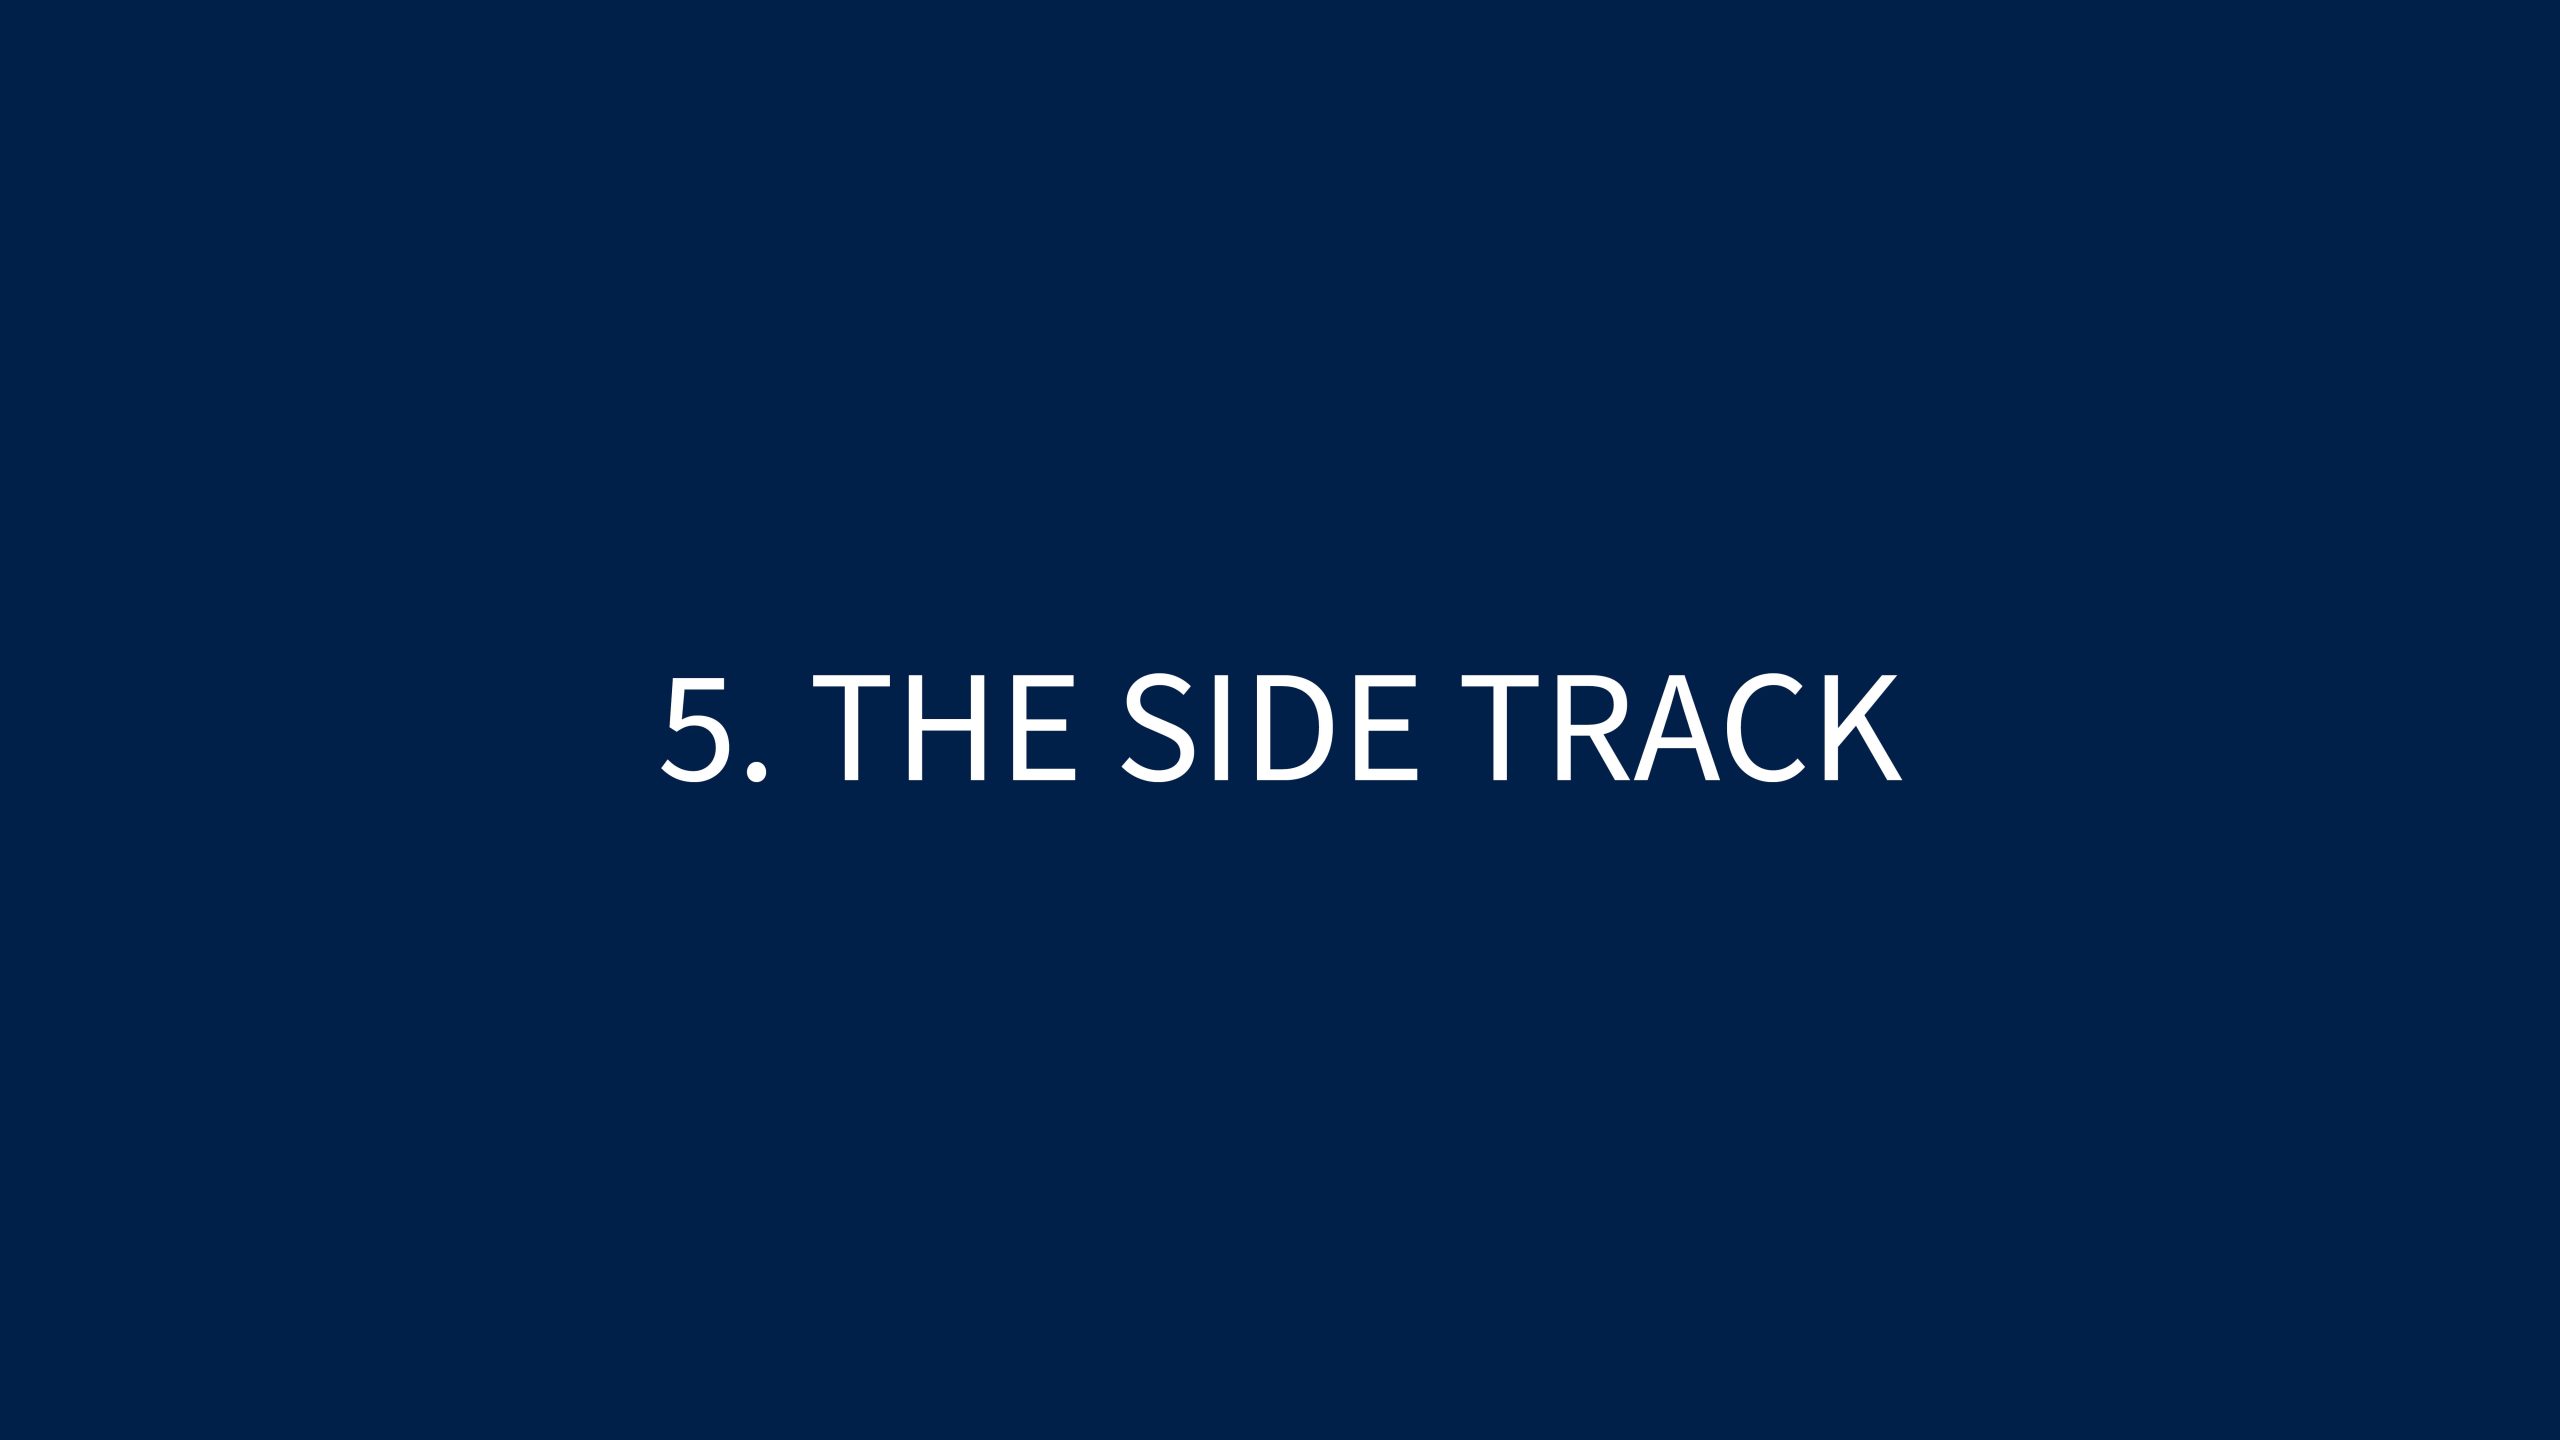 5 THE SIDE TRACK